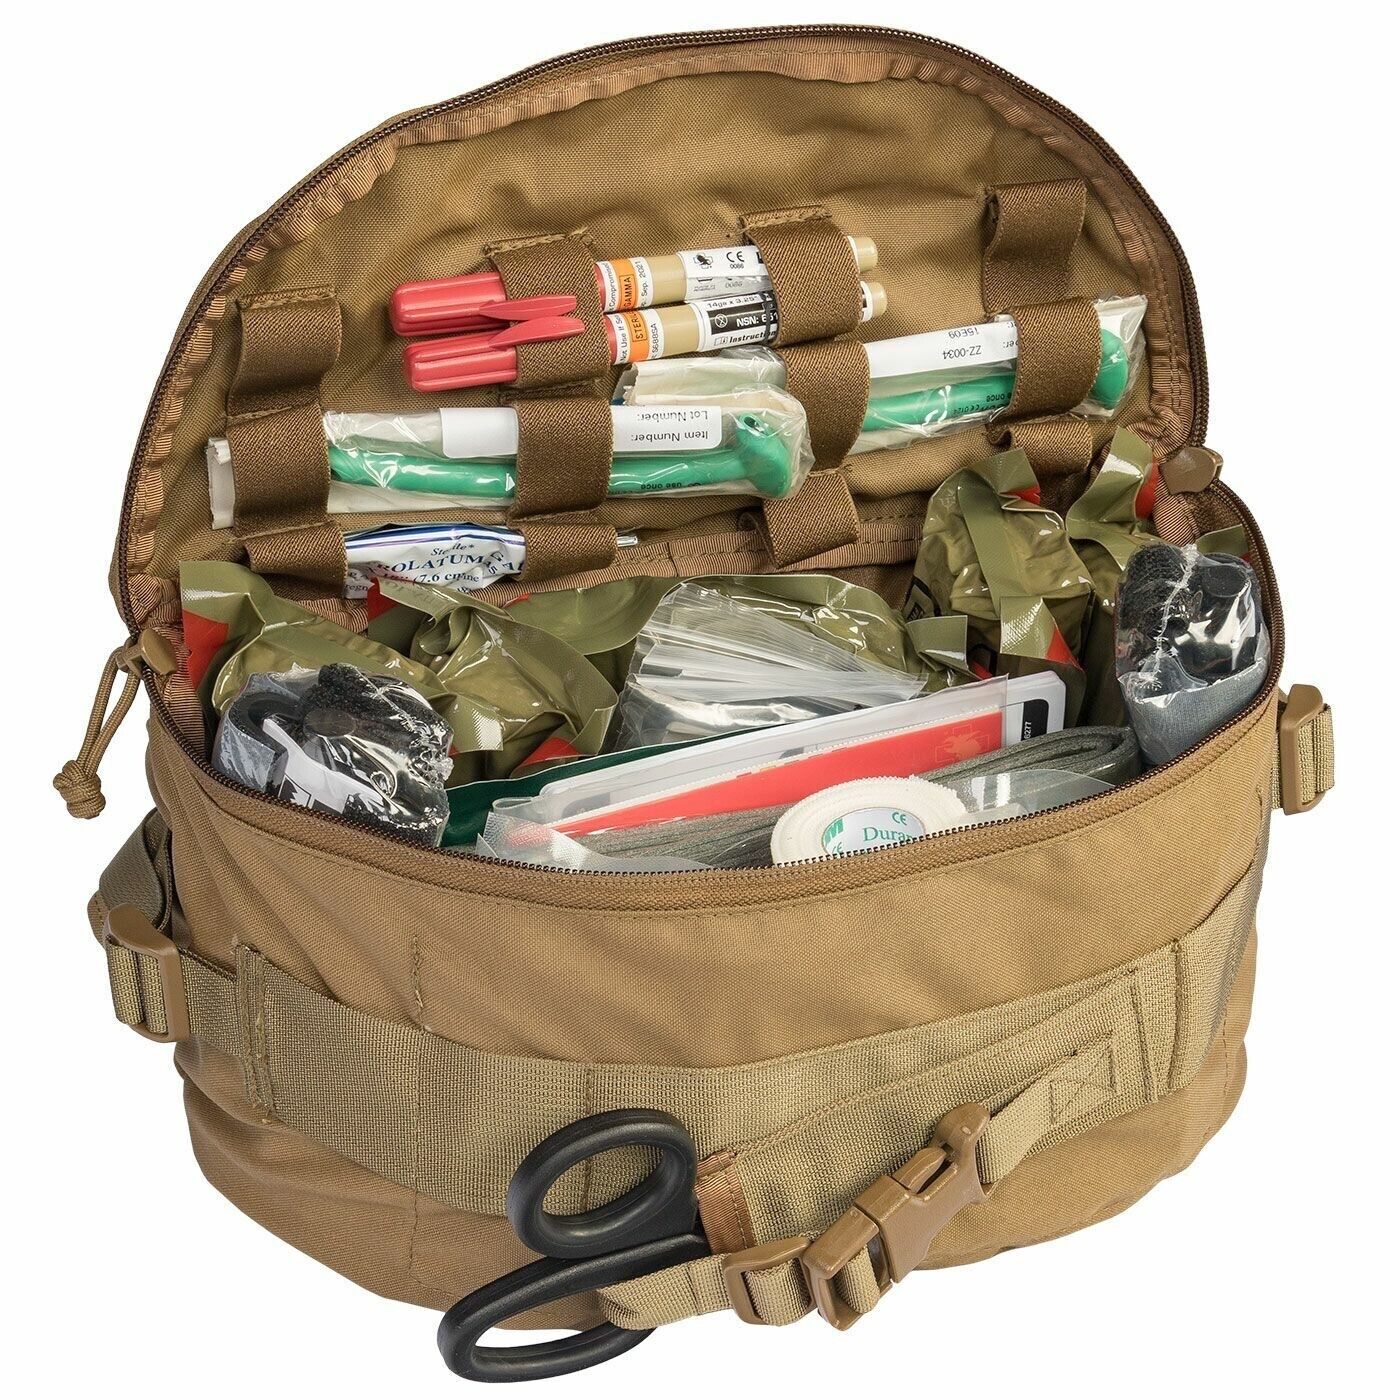 NAR First Aid Combat Casualty Response Kit (CCRK) Squad Kit used W/ tags